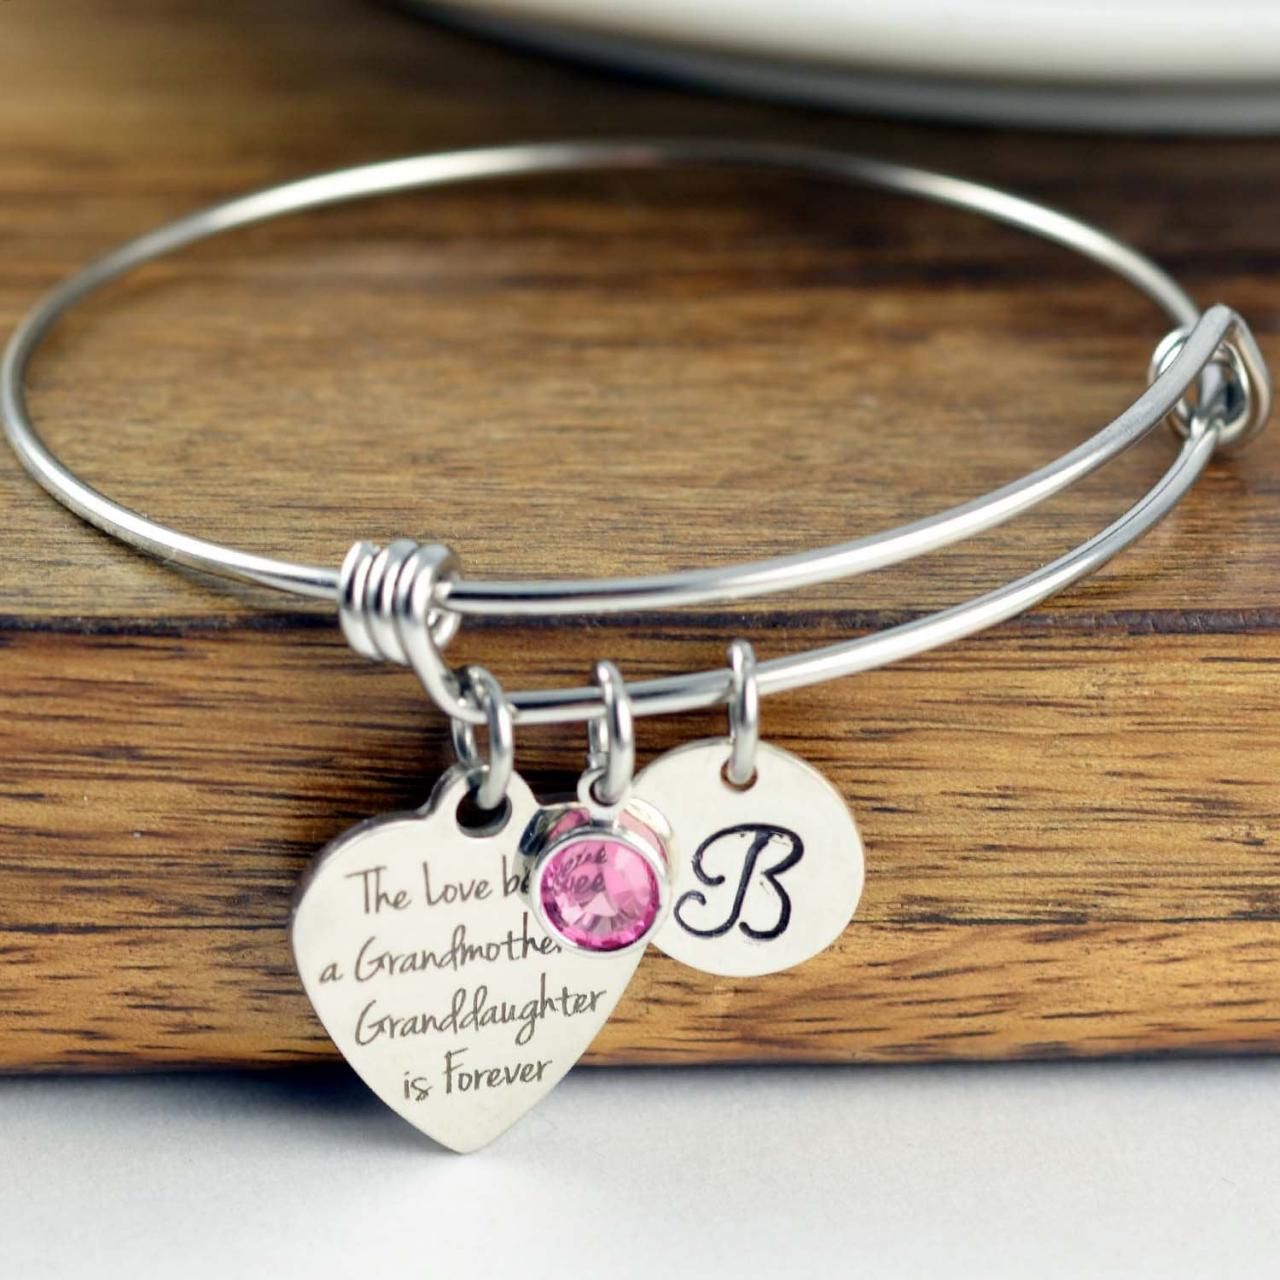 The Love Between A Grandmother And Granddaughter Is Forever Bracelet, Gift For Grandmother, Gift For Grandma, Grandmother Gift, Grandma Gift